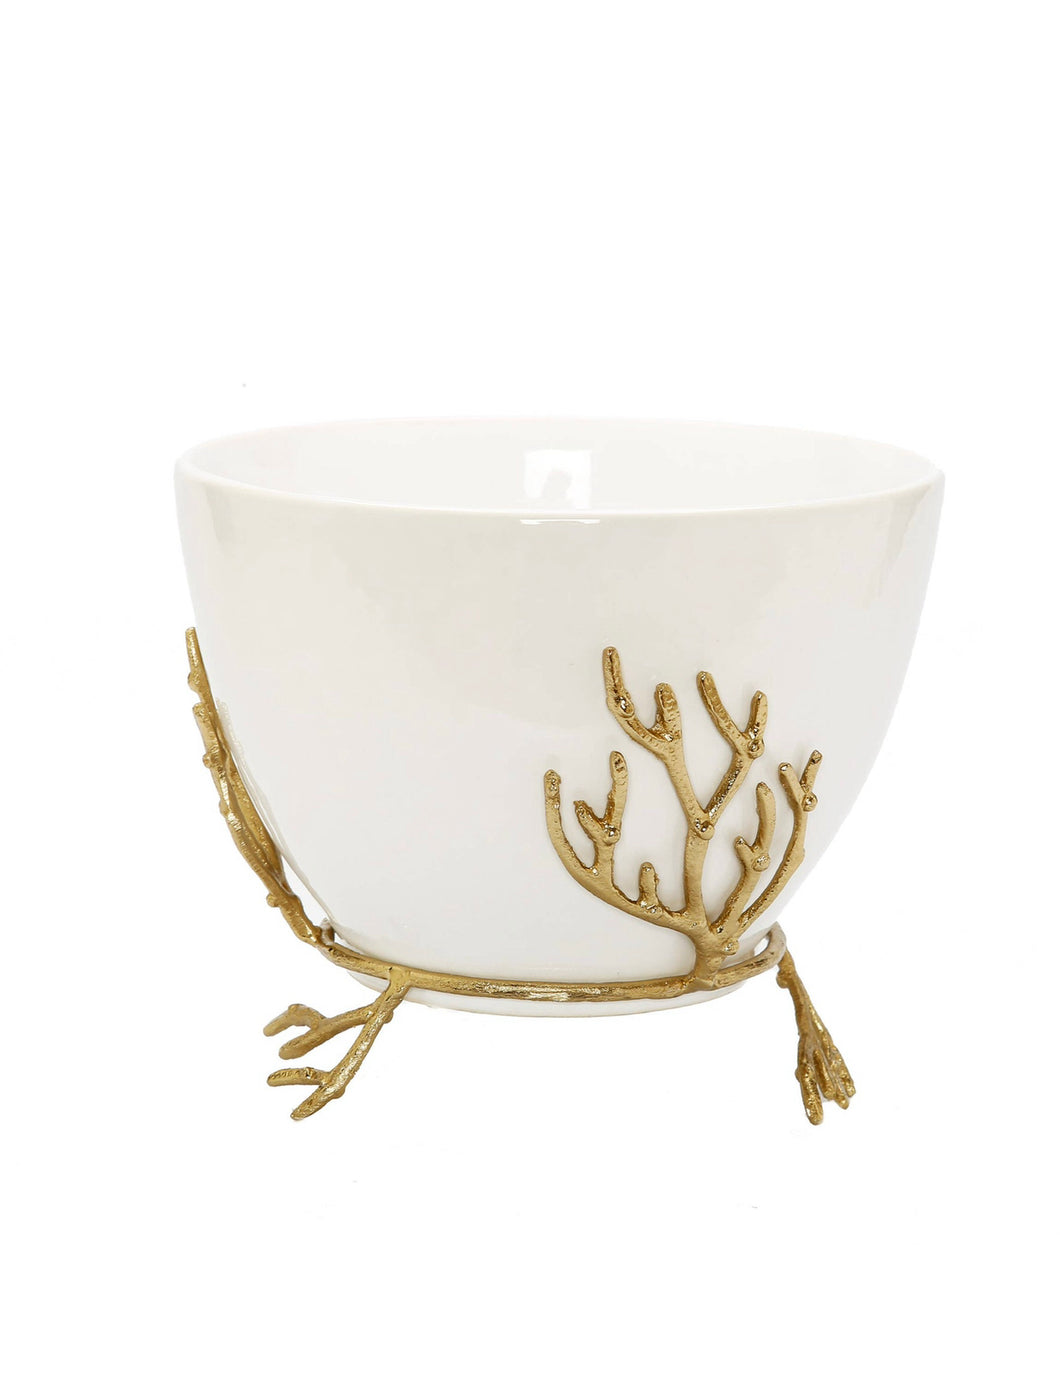 White Bowl on Gold Base with Gold Coral Design Ornament